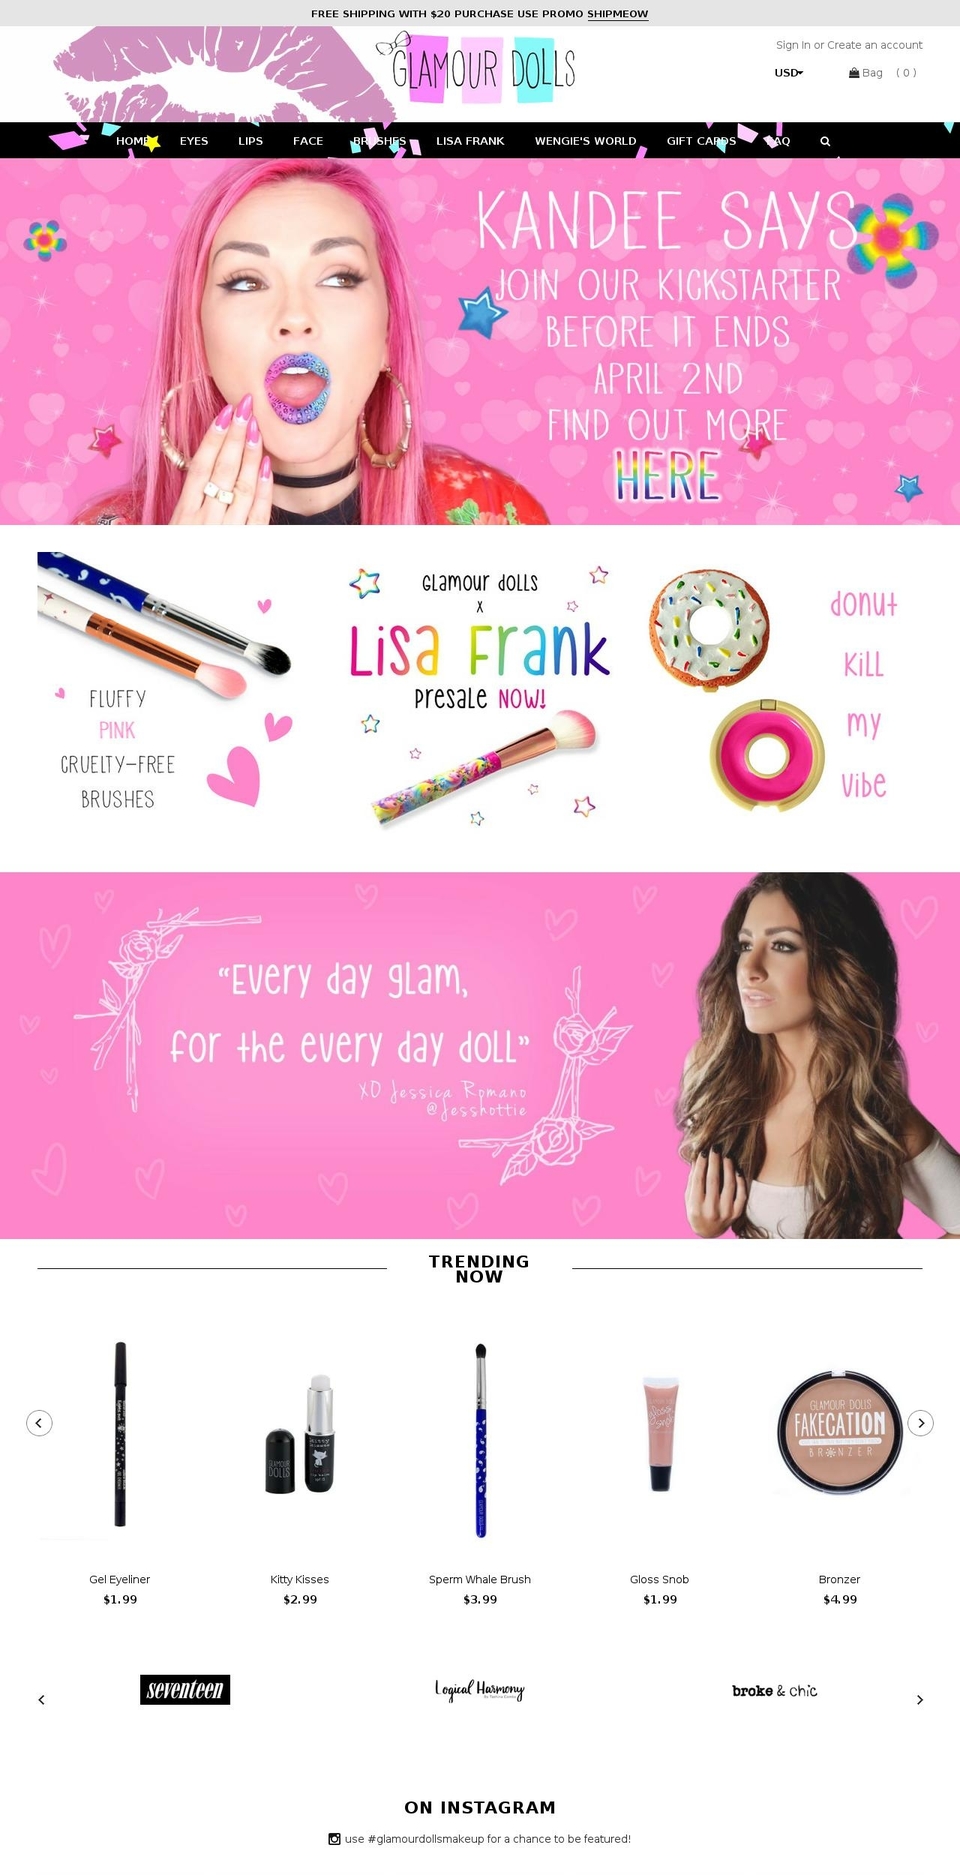 Made With ❤ By Minion Made Shopify theme site example jessica-romano.com